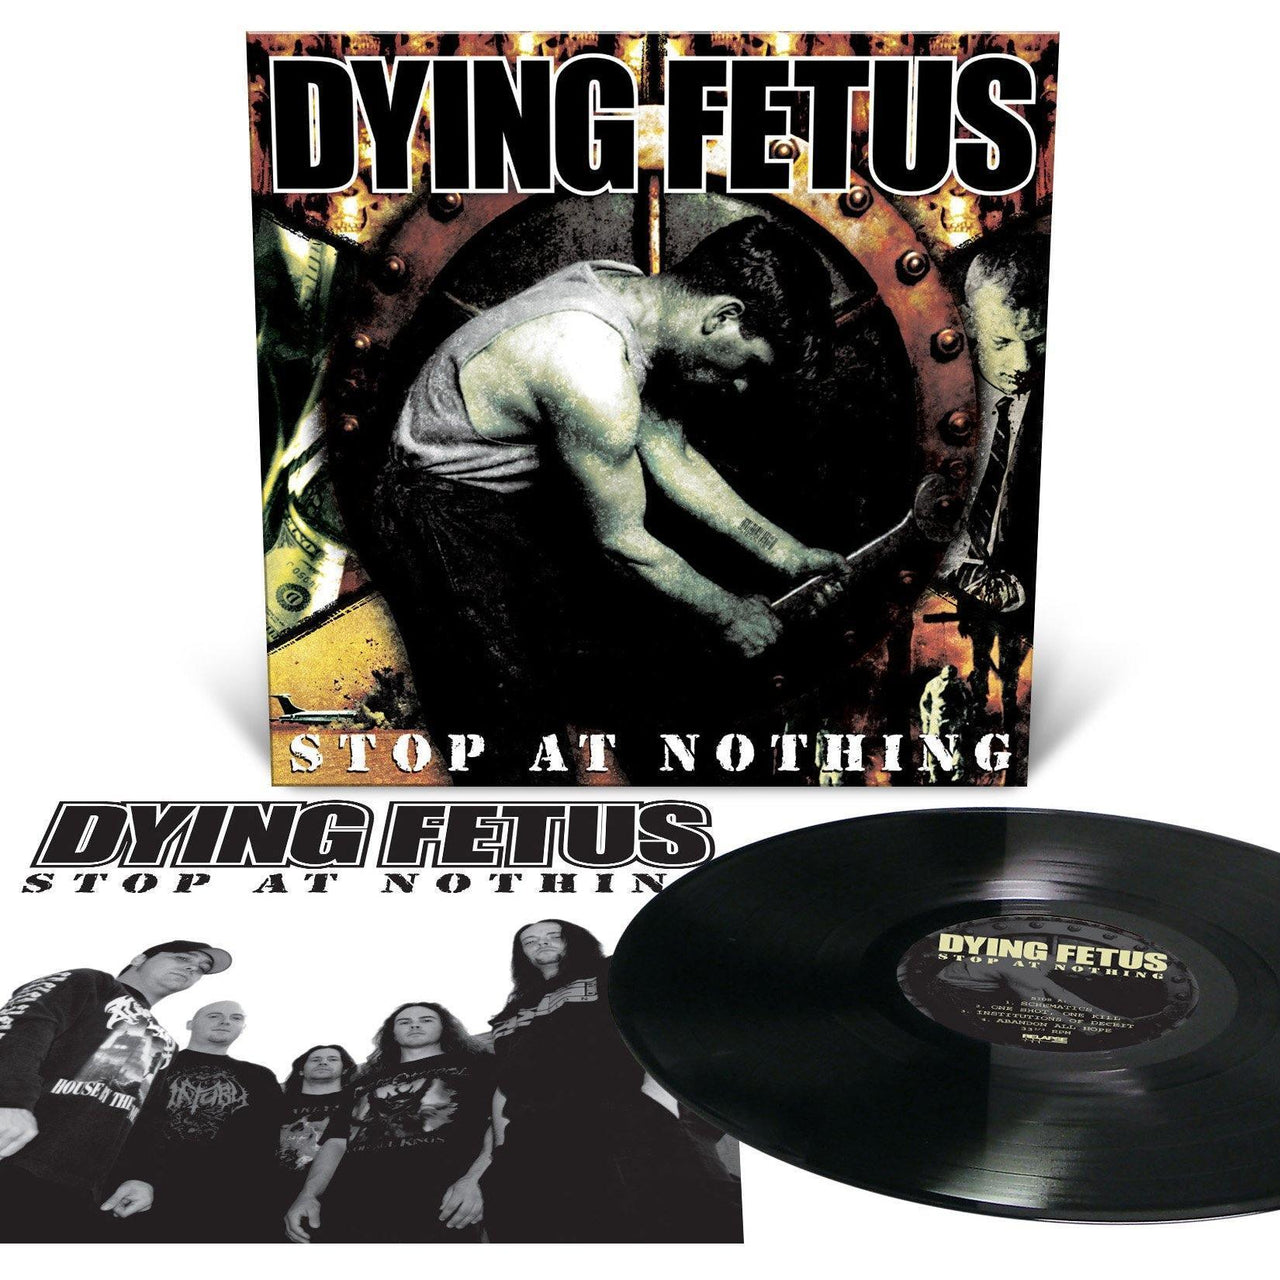 Buy – Dying Fetus "Stop At Nothing" 12" – Band & Music Merch – Cold Cuts Merch